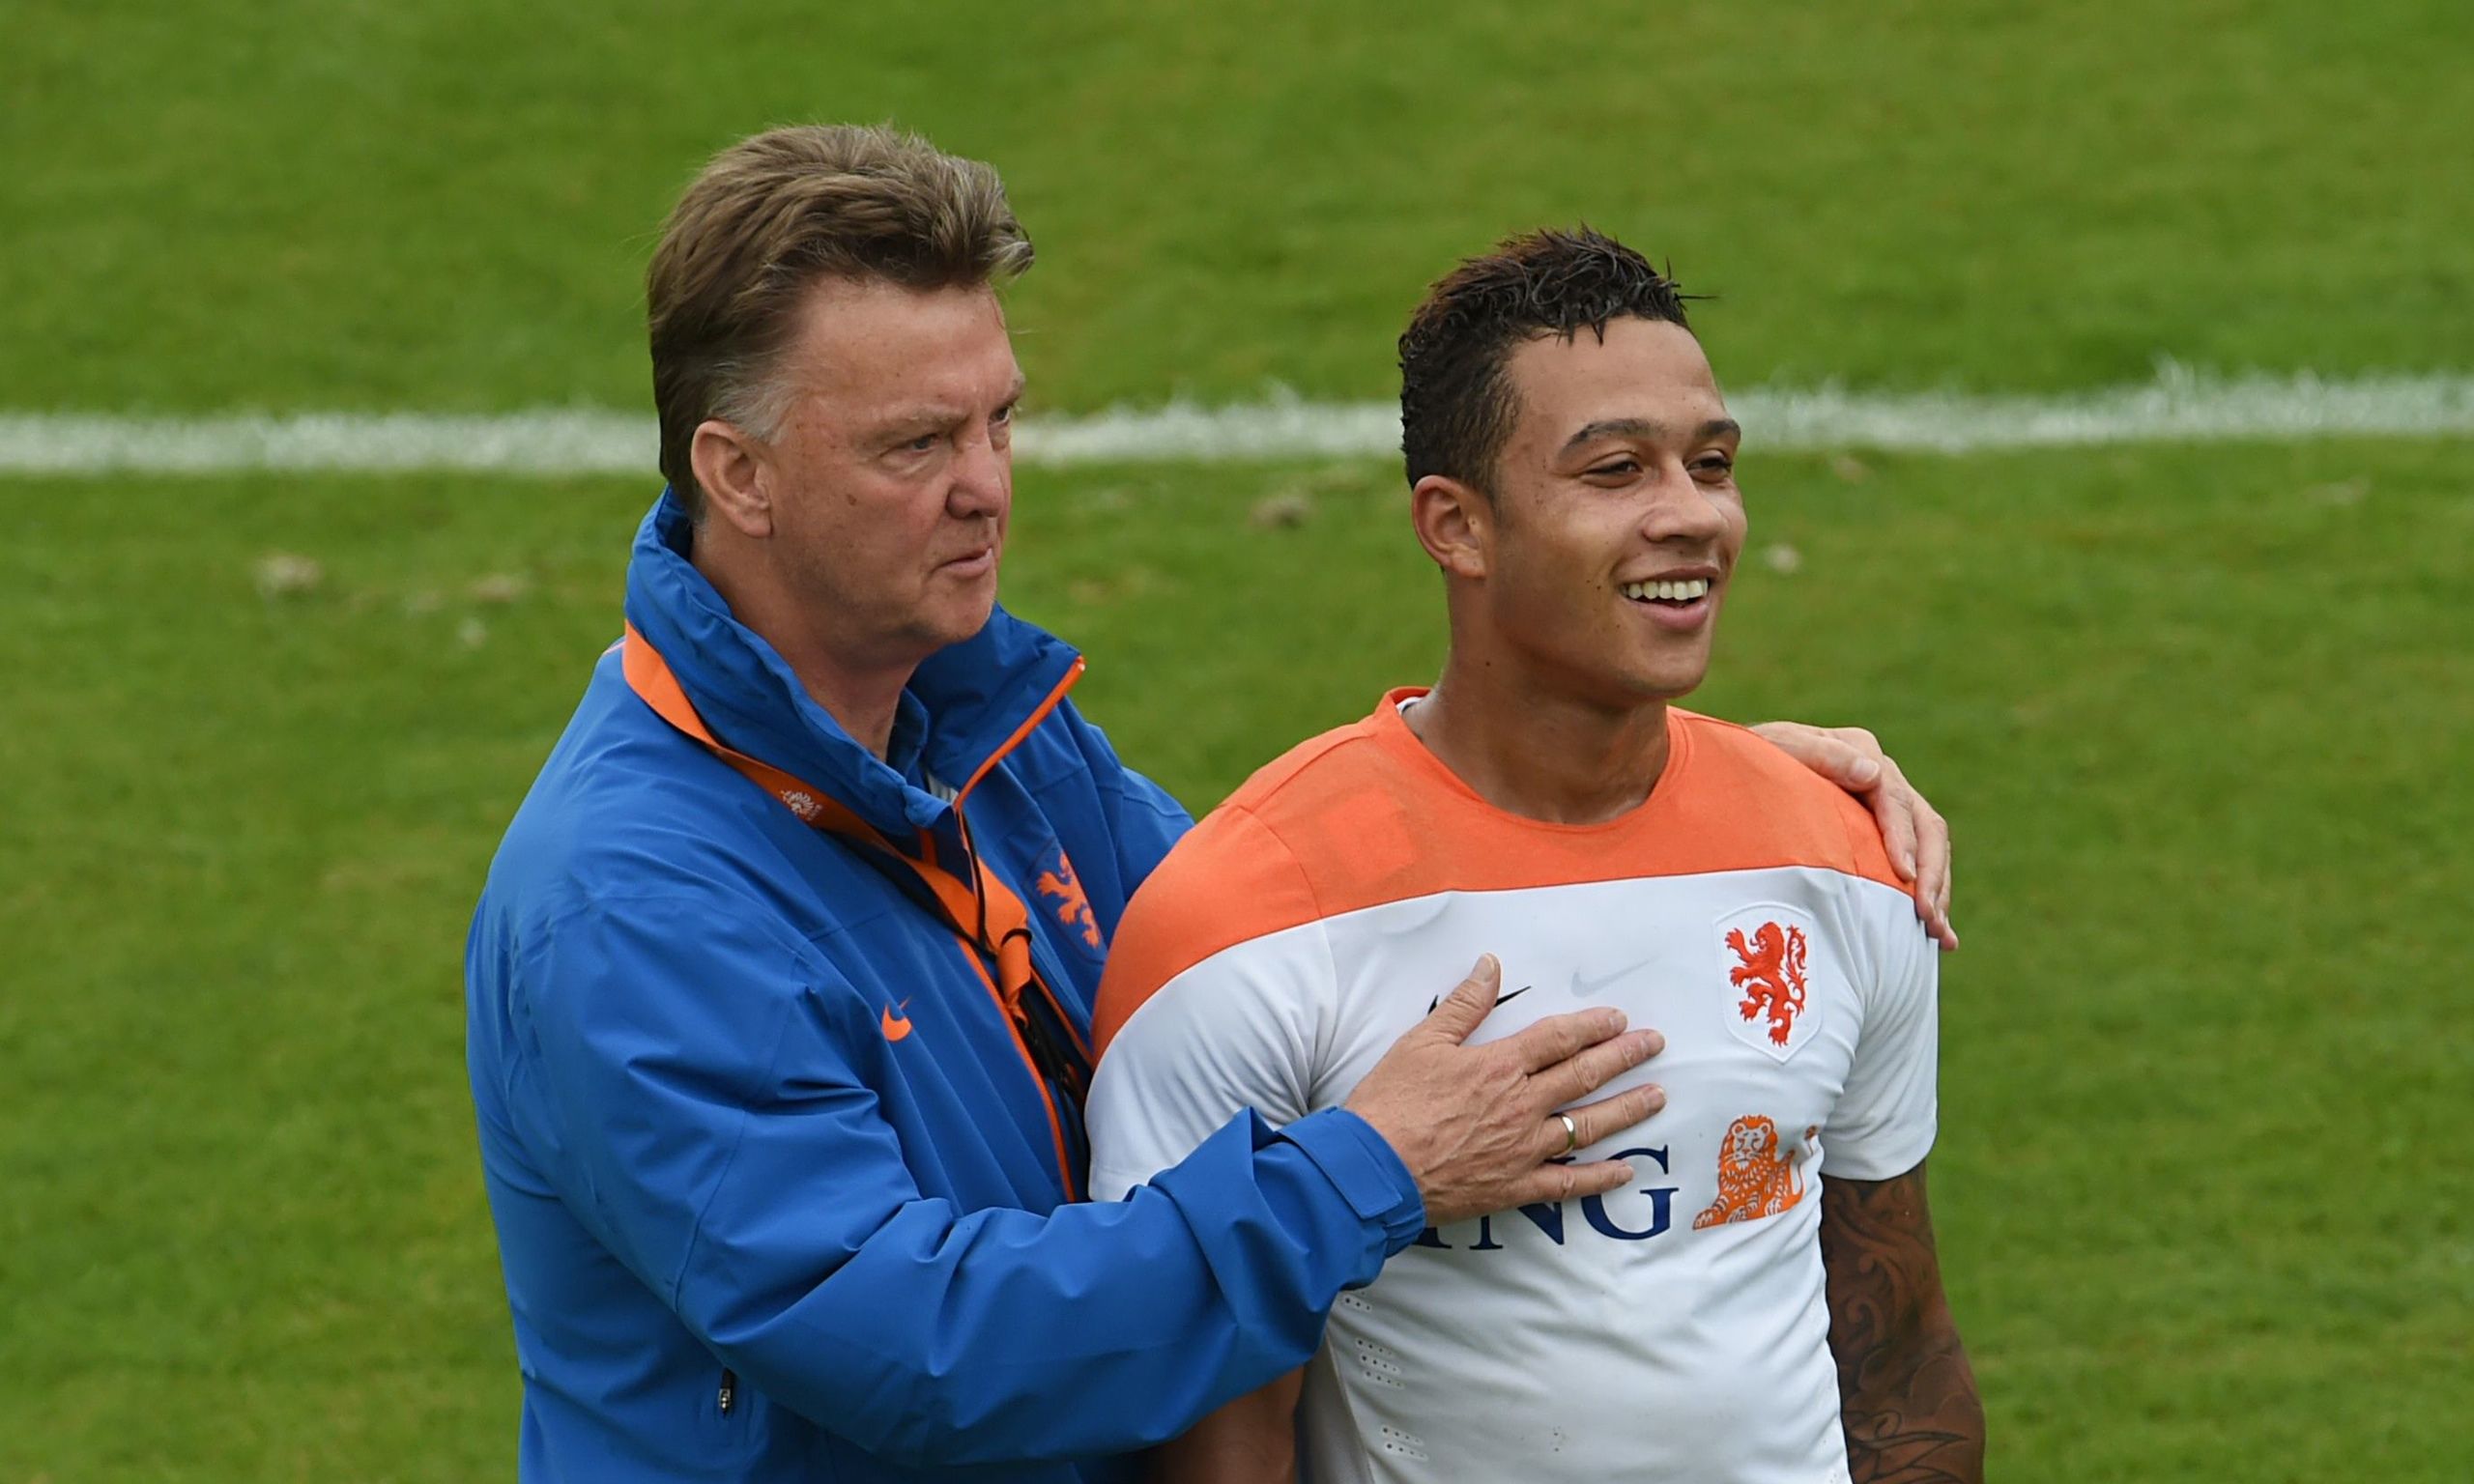 Van Gaal says Depay will miss the Netherlands' first match at the 2022 World Cup in Qatar